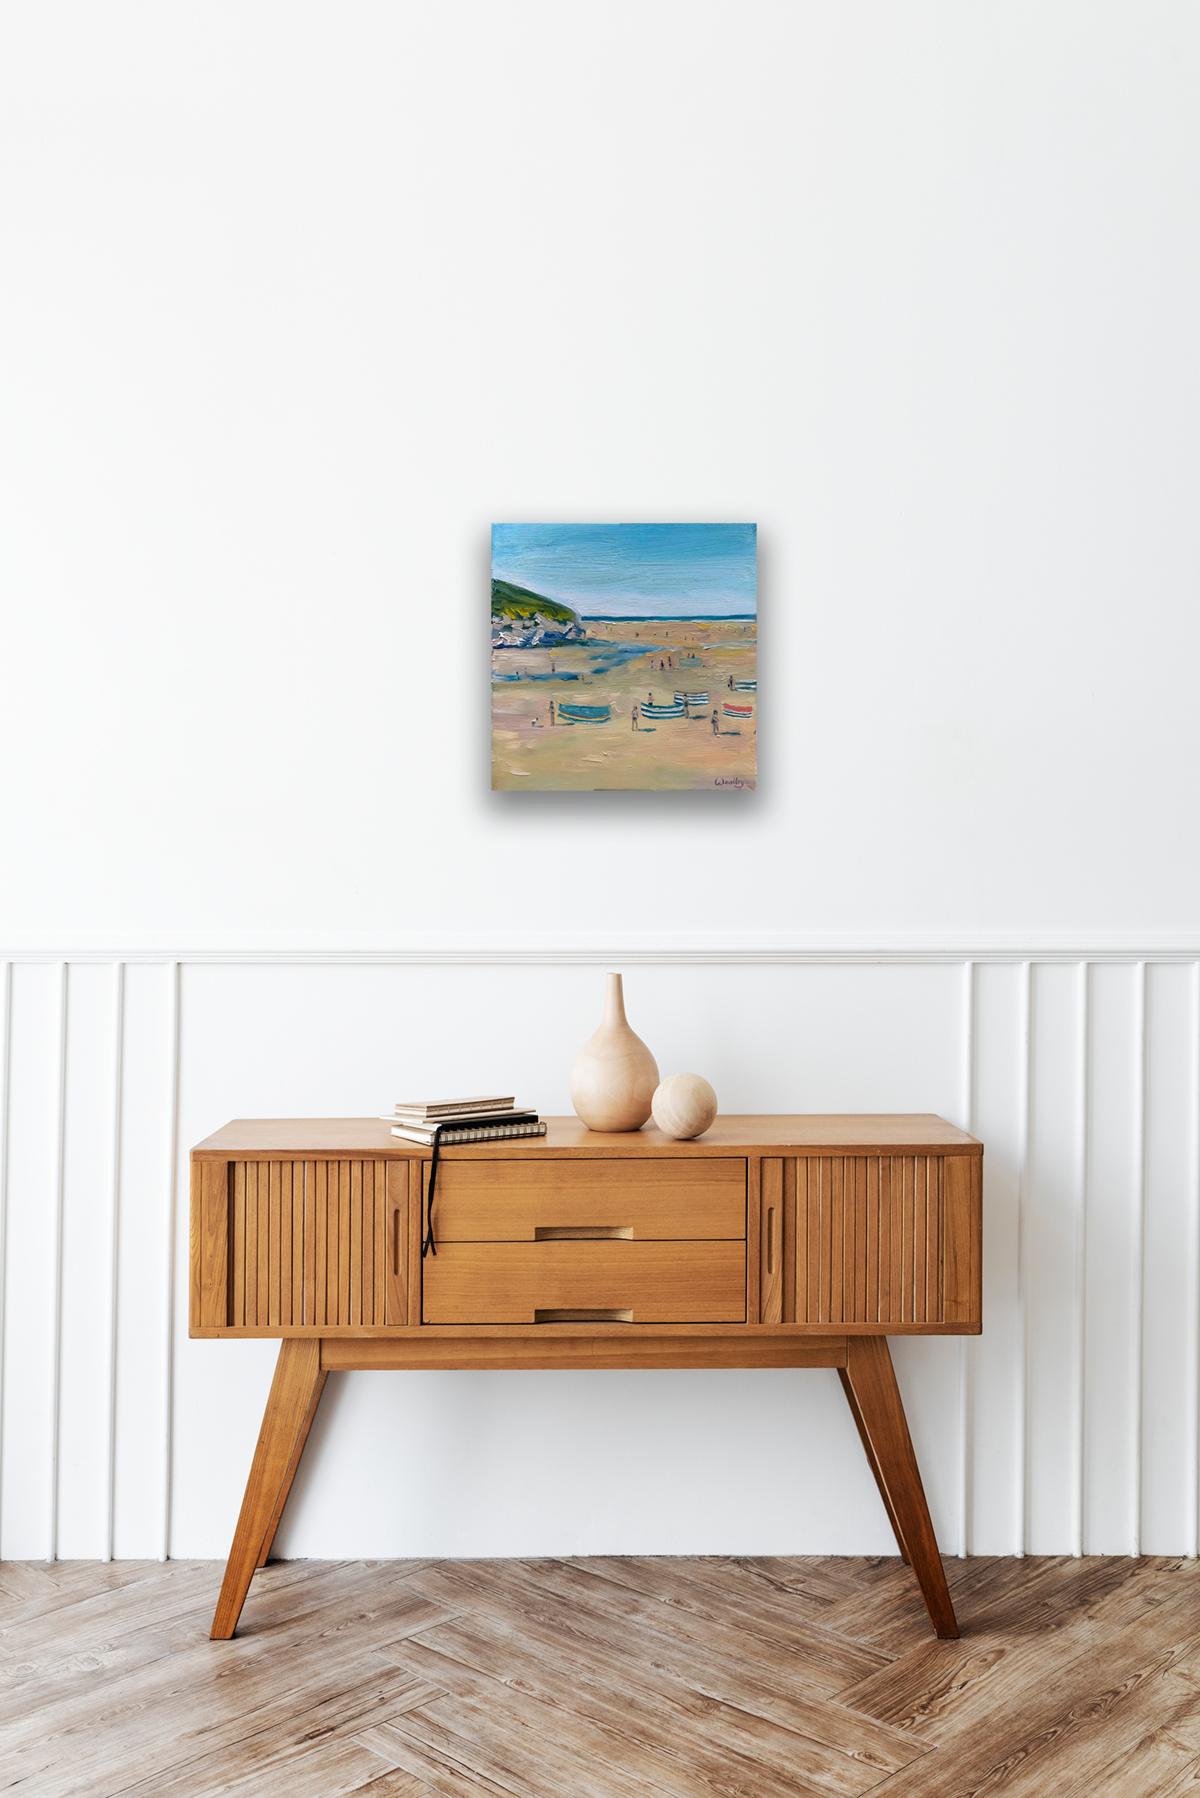 Mawgan Porth Shadows is an Original Painting by Eleanor Woolley. This painting is inspired by the Artist's summer vacations around Cornwall. Mawgan Porth is just a stones throw from Newquay and is a beautiful beach to avoid the summer crowds. The